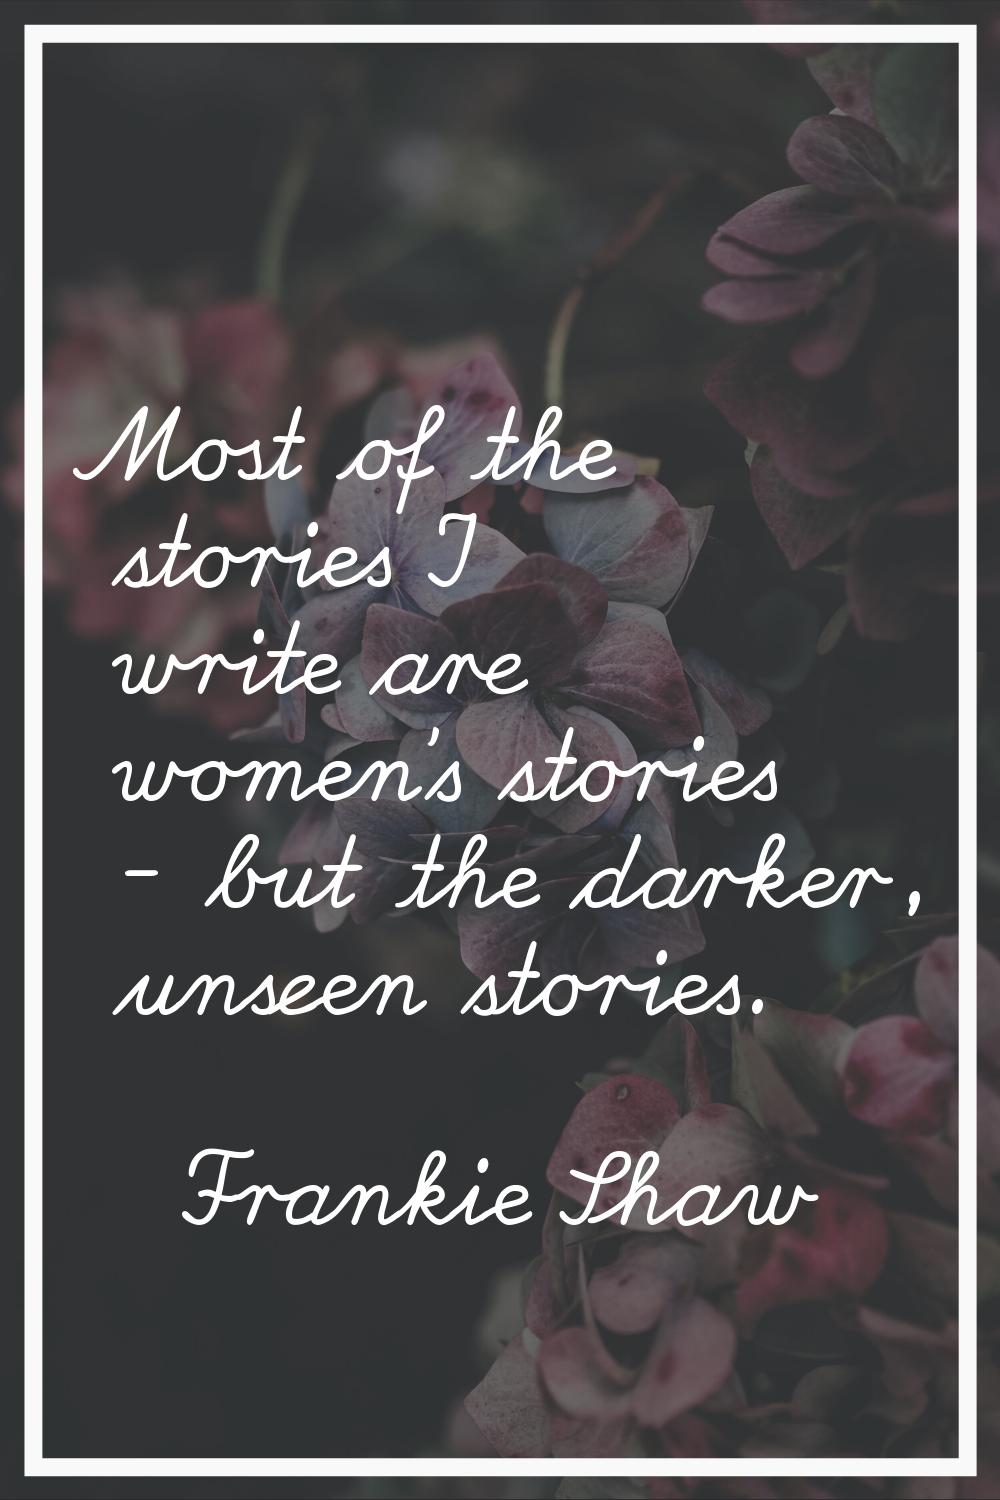 Most of the stories I write are women's stories - but the darker, unseen stories.